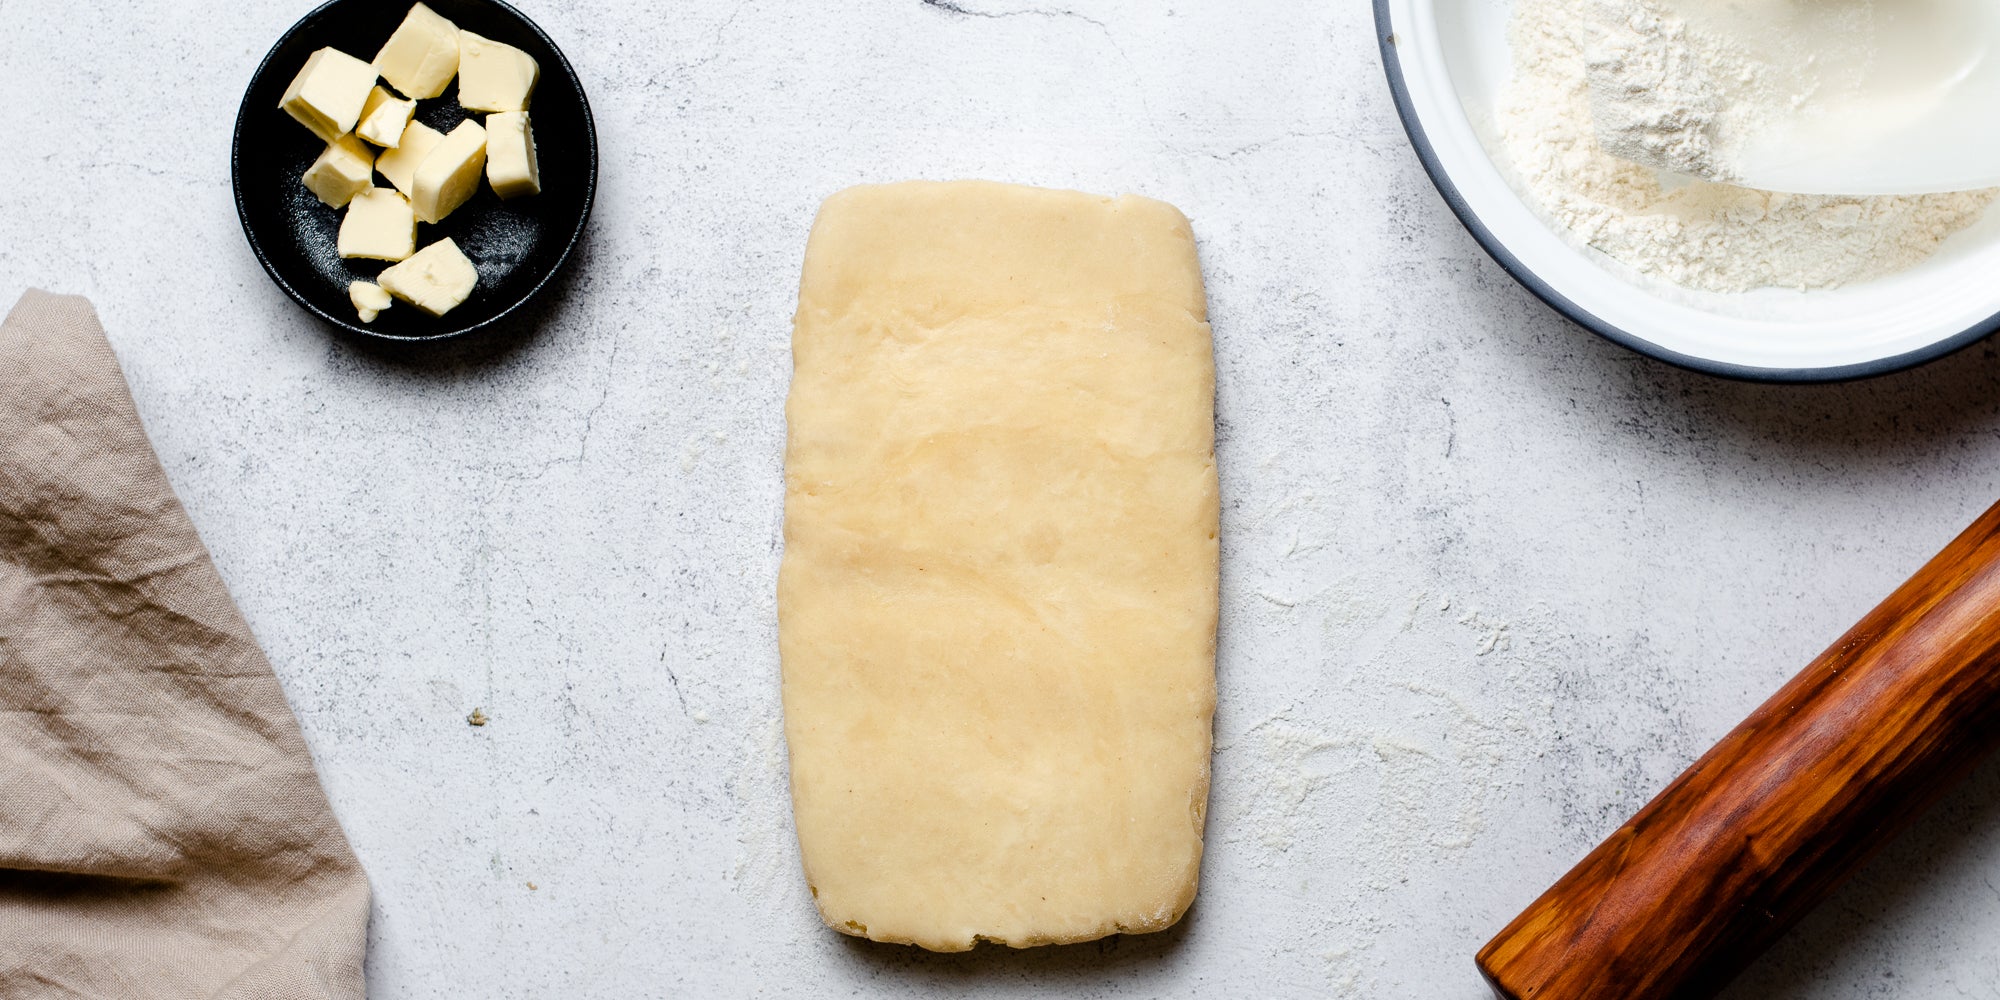 Puff Pastry rolled out onto a surface next to a dish of butter, bowl of flour and rolling pin